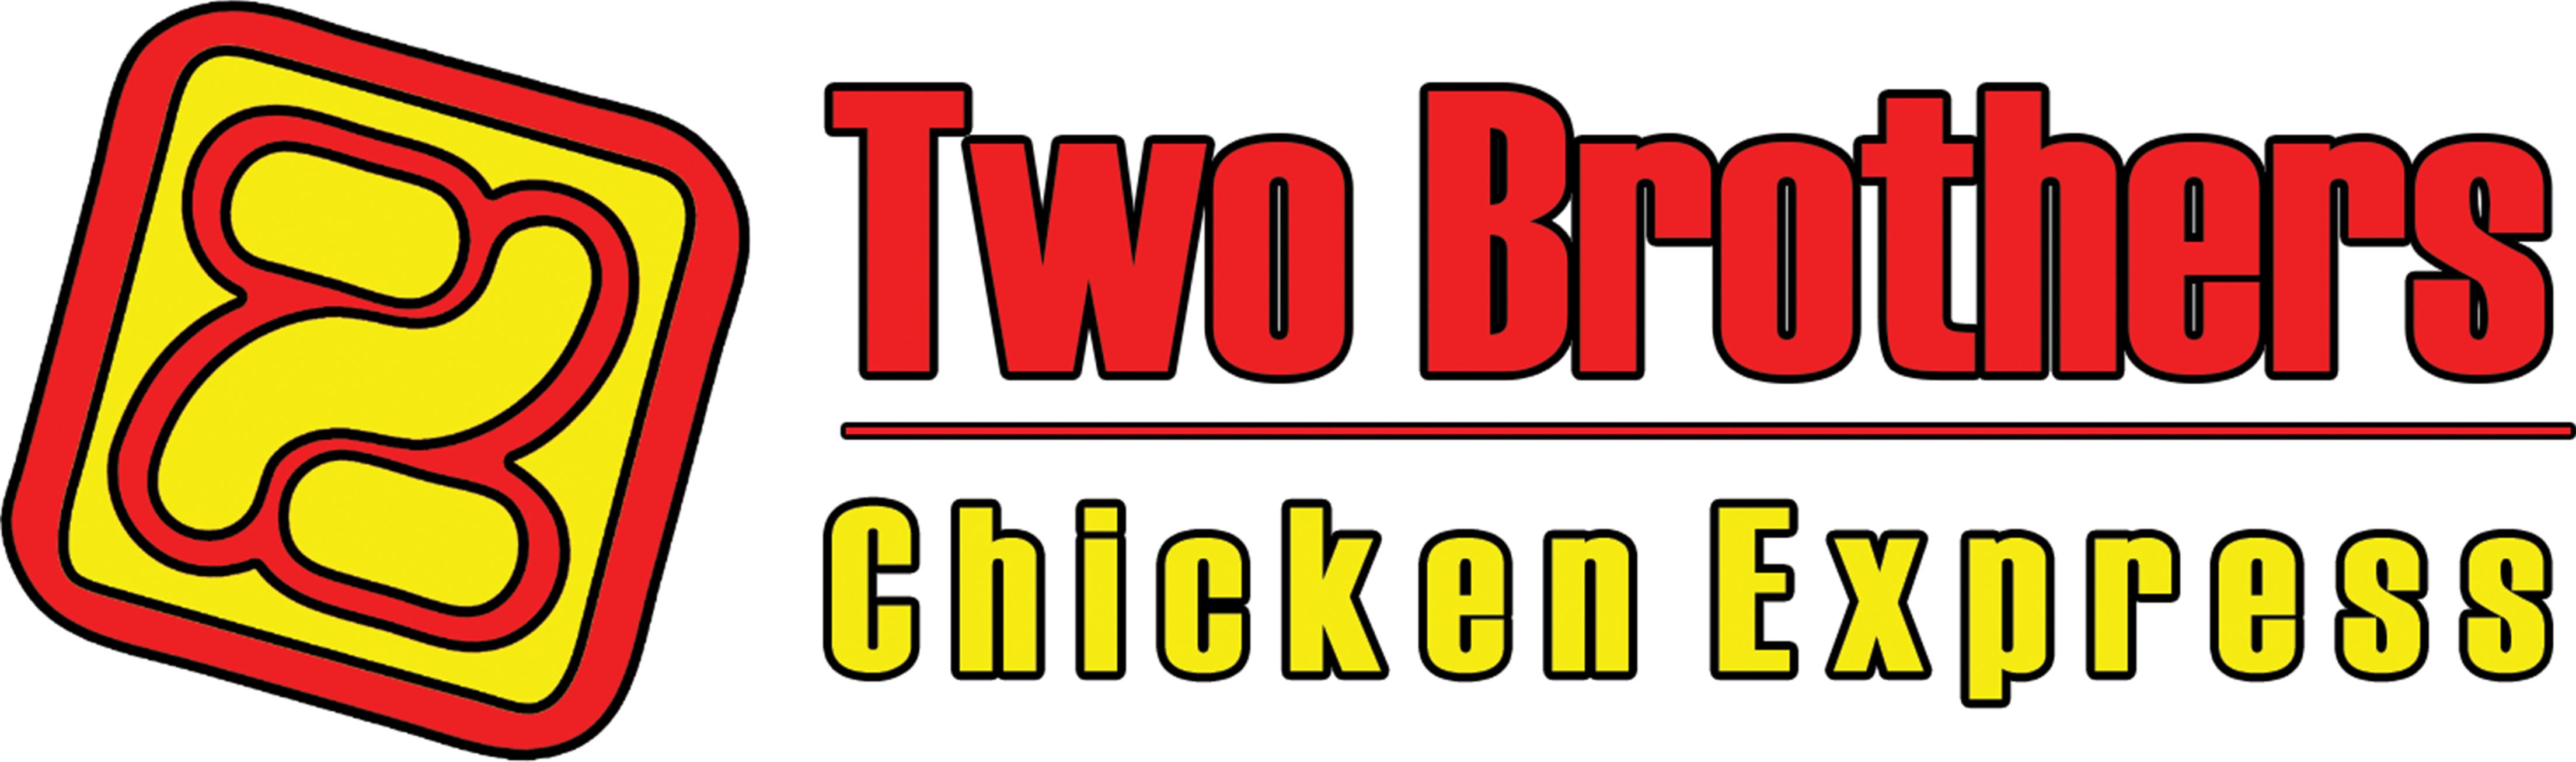 Two Brothers Chicken - Manassas 9745 Liberia Ave